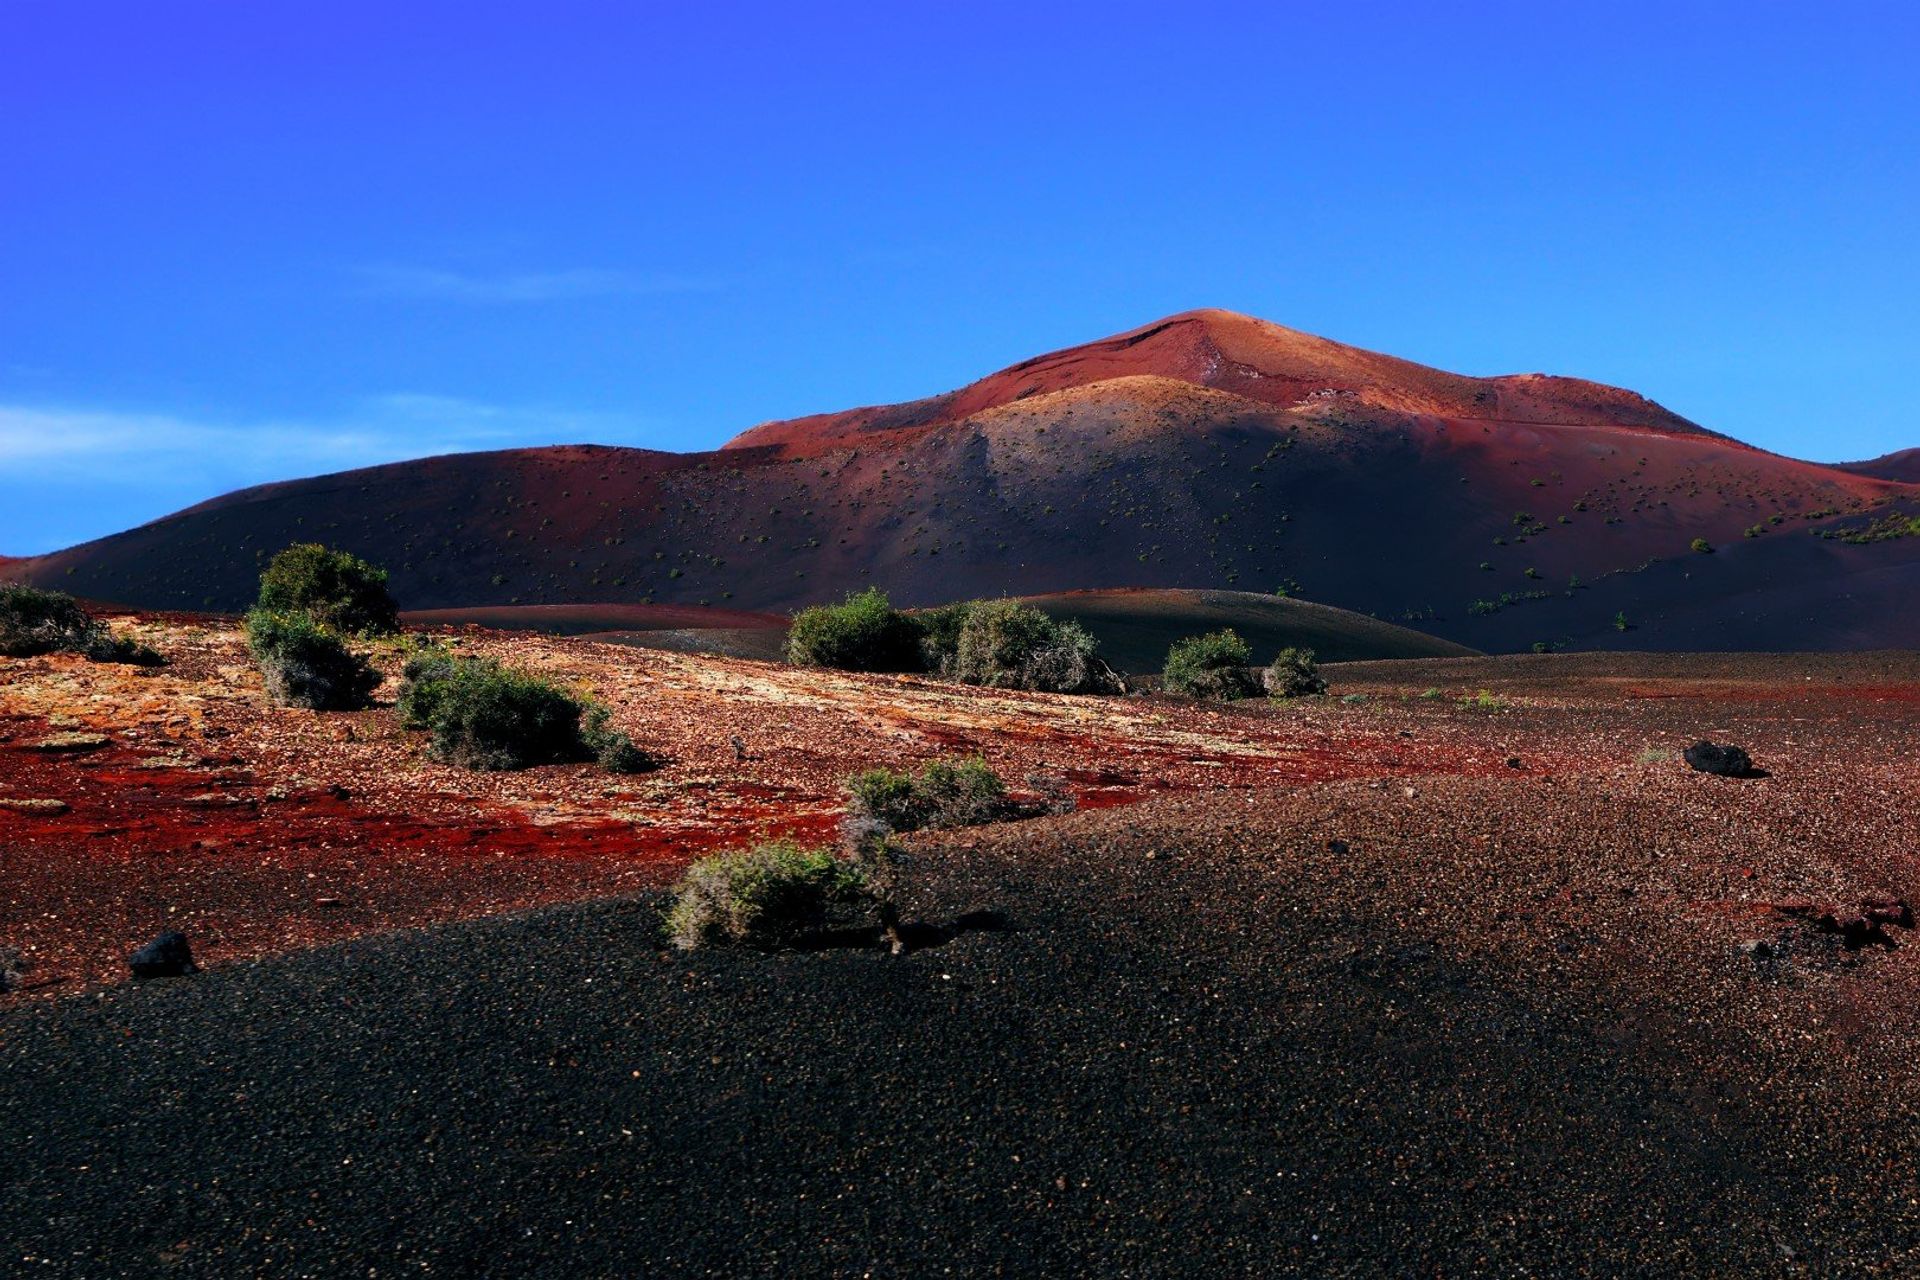 The volcanic landscape of Timanfaya National Park stretching across the districts of Tinajo and Yaiza